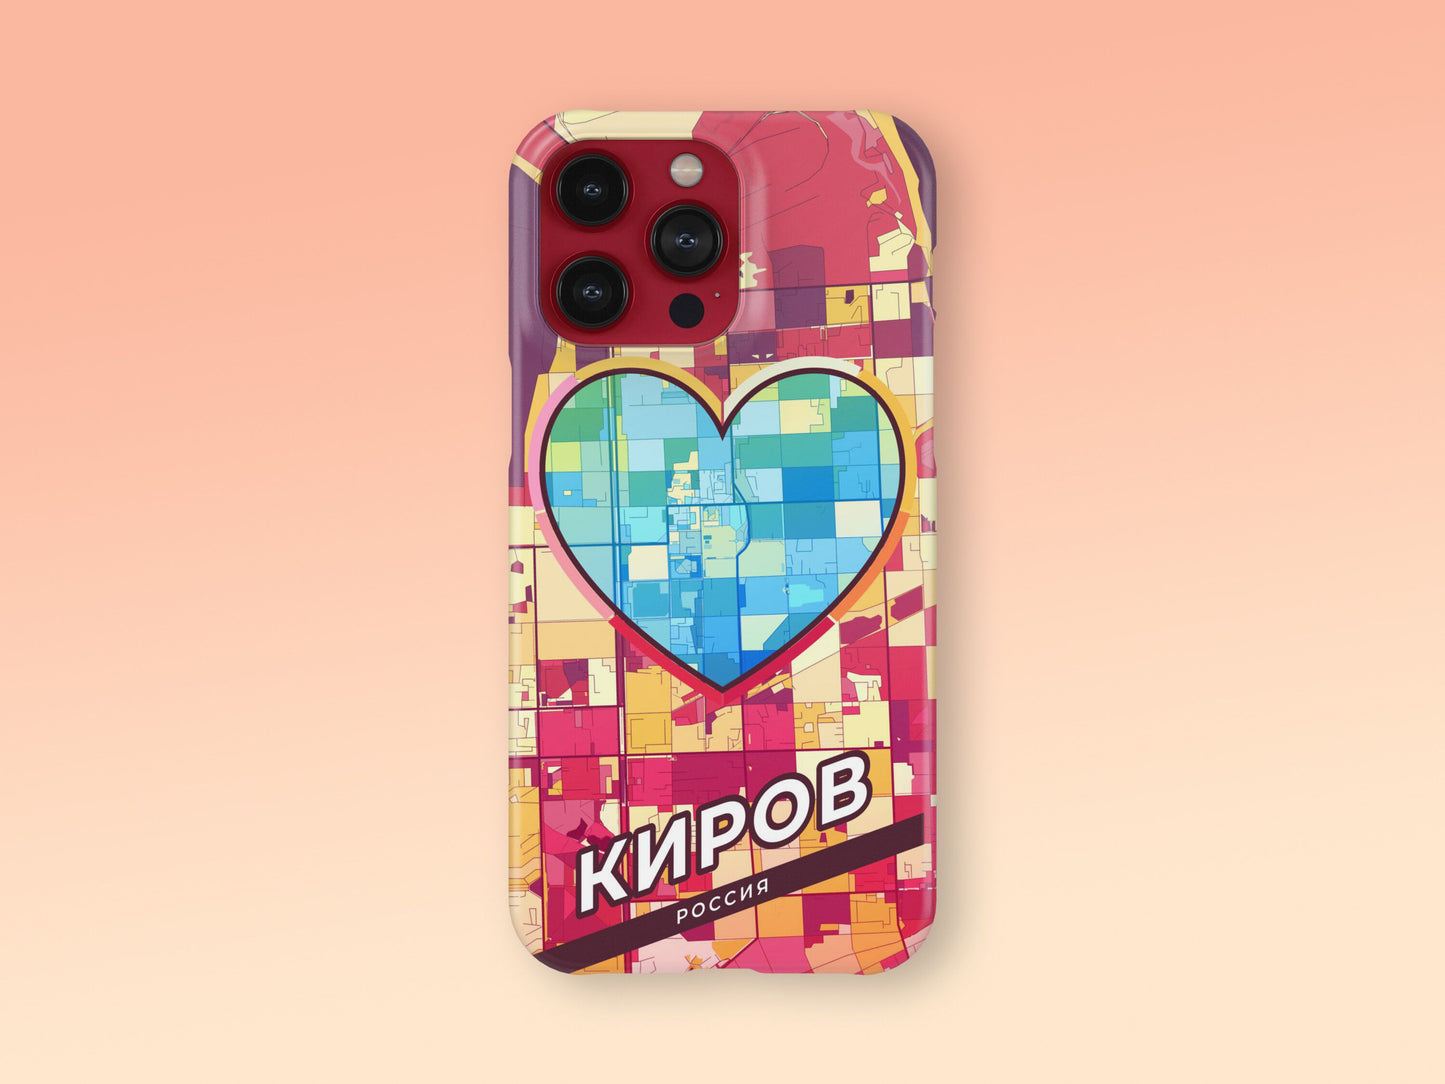 Kirov Russia slim phone case with colorful icon. Birthday, wedding or housewarming gift. Couple match cases. 2